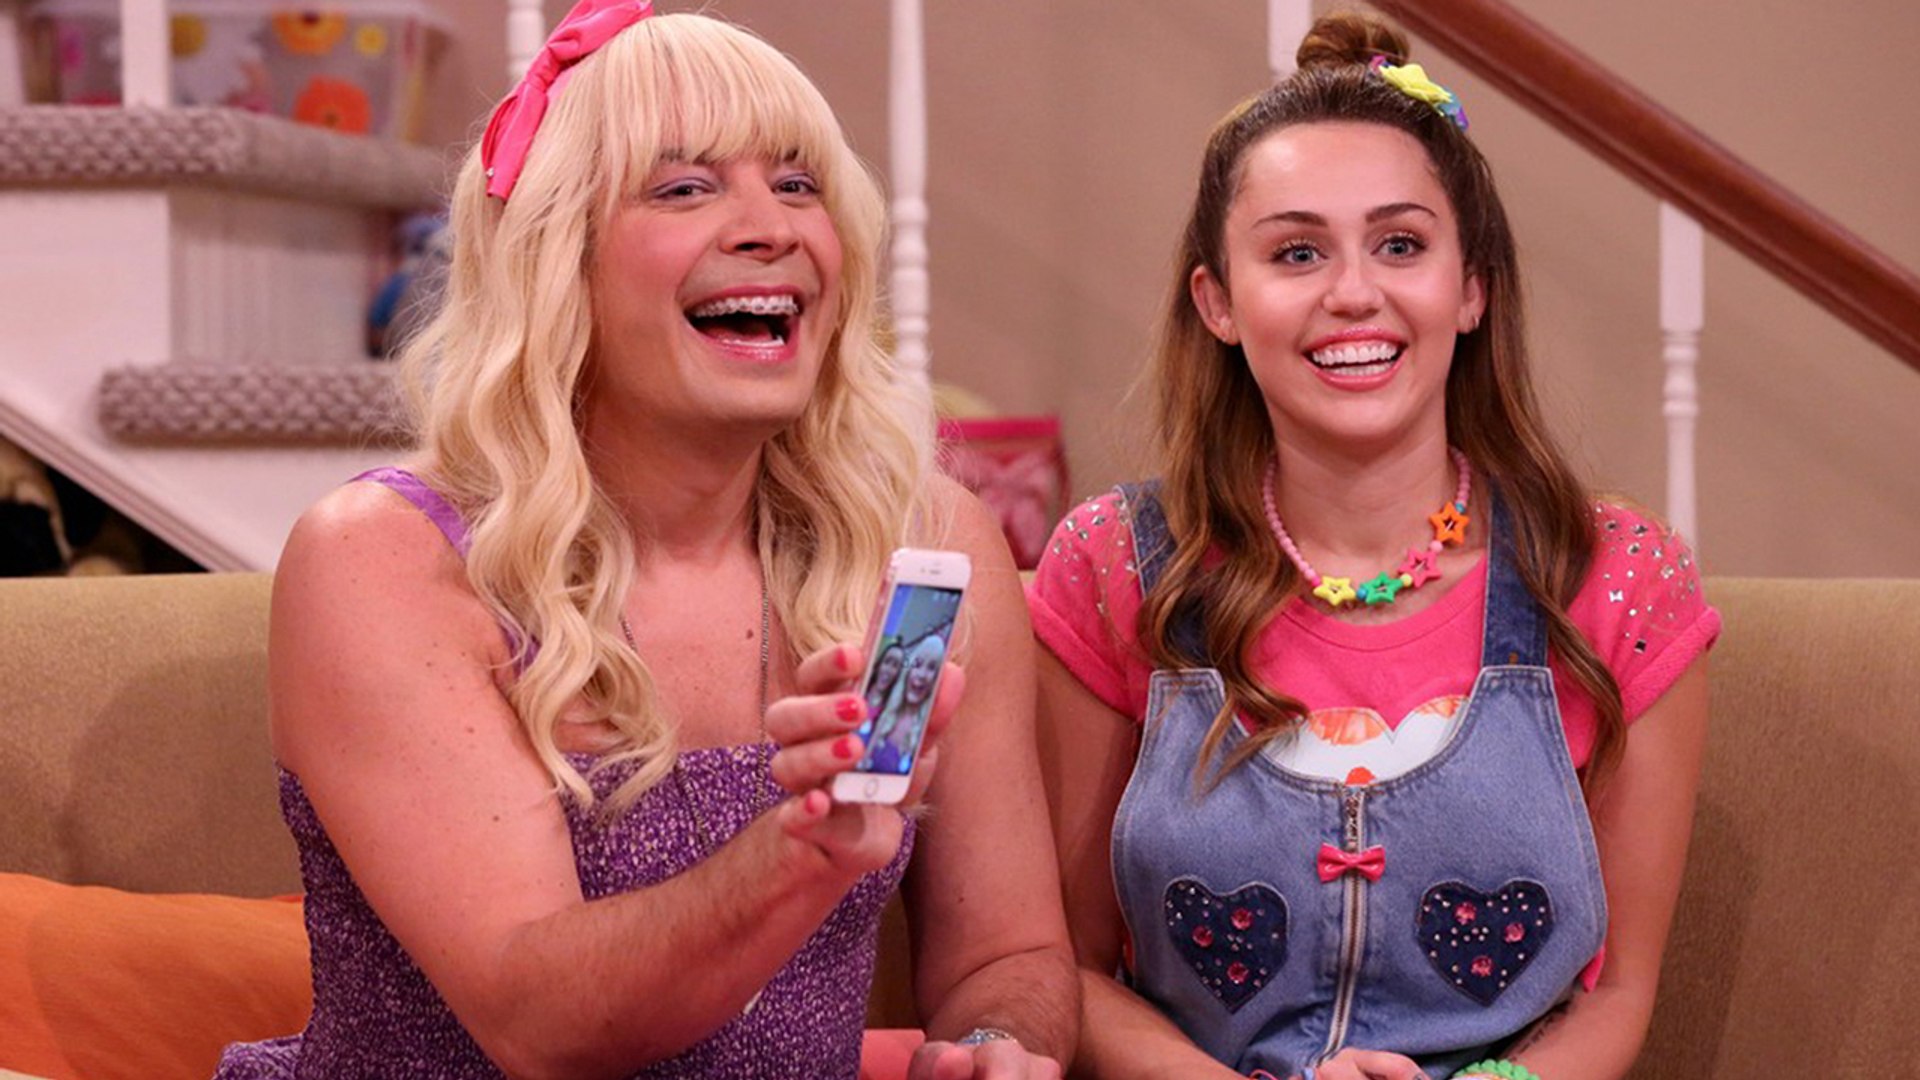 Miley Cyrus Hilarious ‘Ew!’ Sketch With Jimmy Fallon